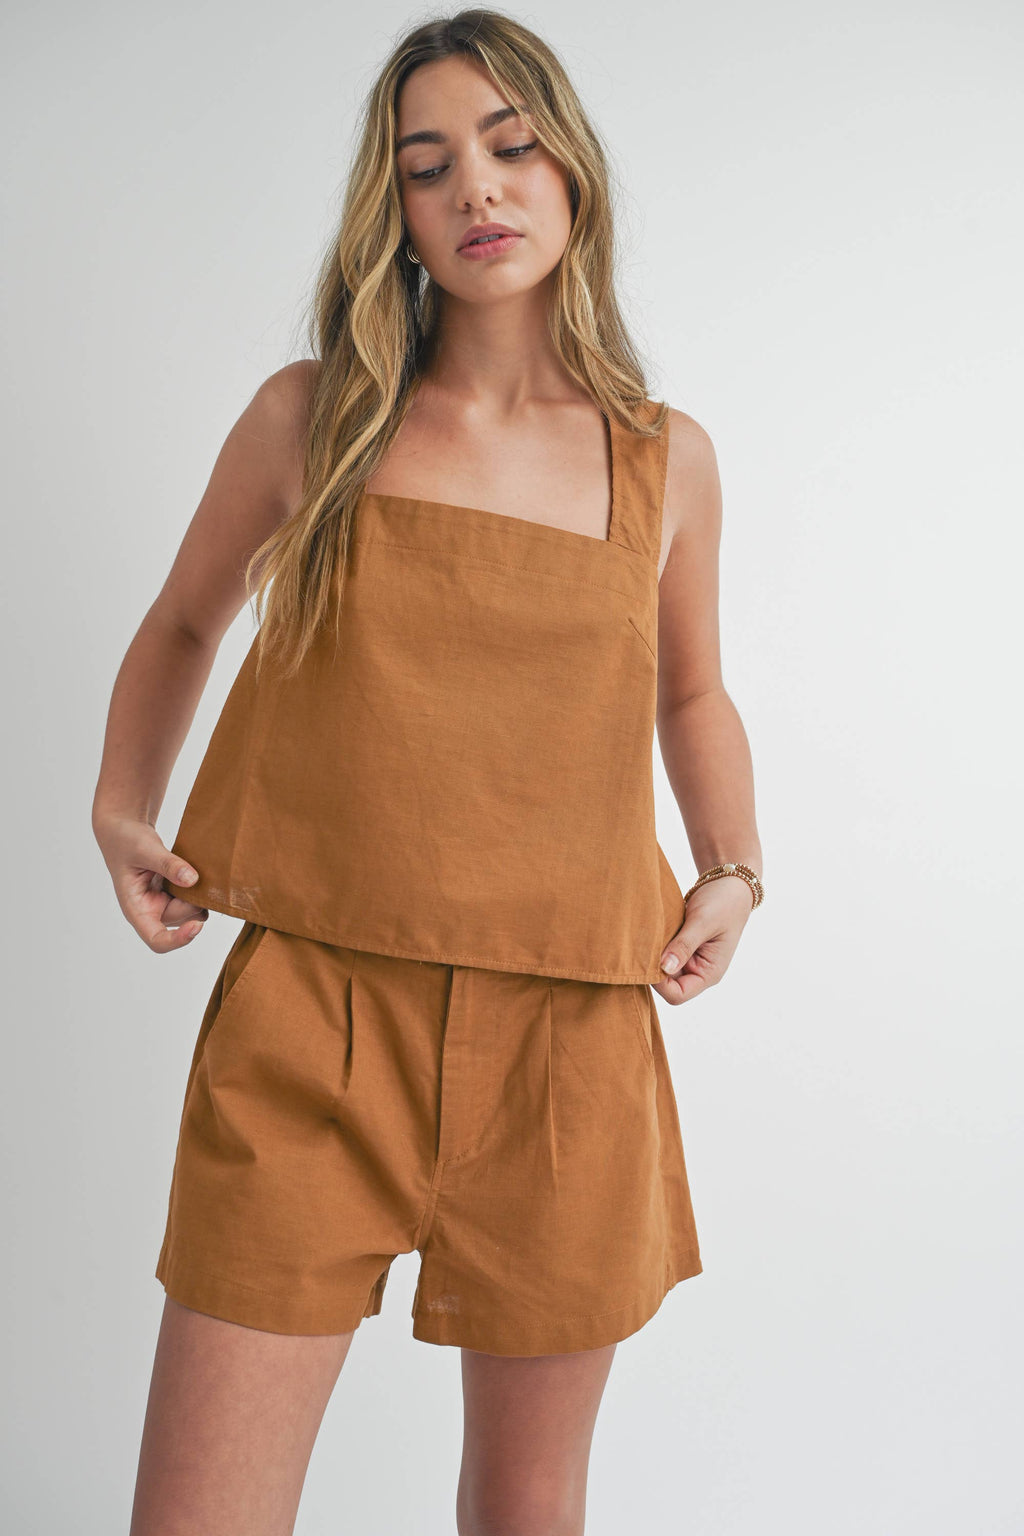 T3187ST CROSSED BACK DETAIL LINEN TOP: M / TOFFEE